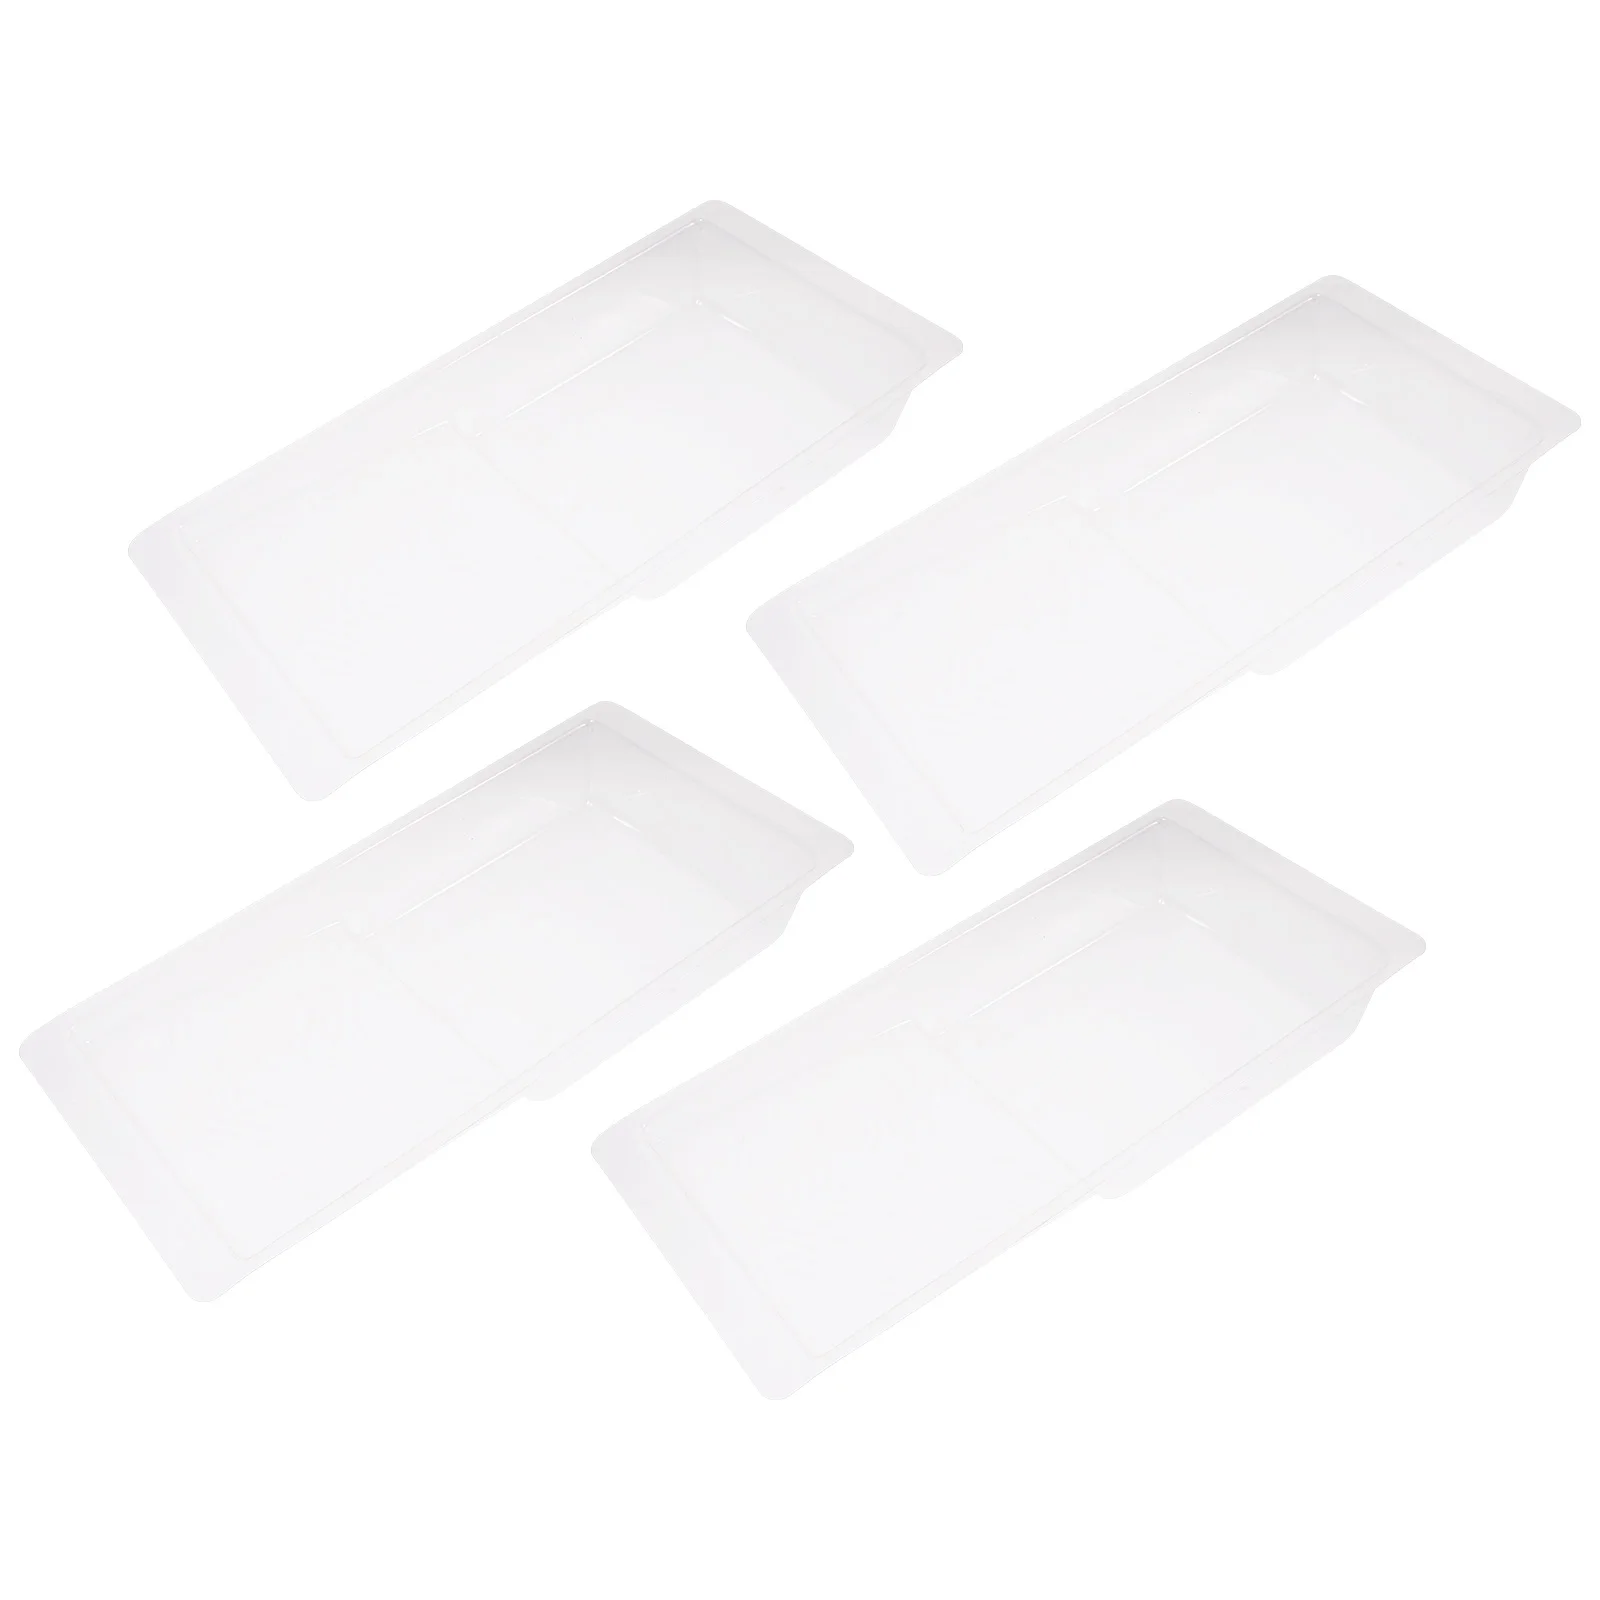 

4 Pcs Small Paint Tray Tray Lining Reusable Paint Large Liner Trays Disposable Liners for Roller Clear Transparent Supply